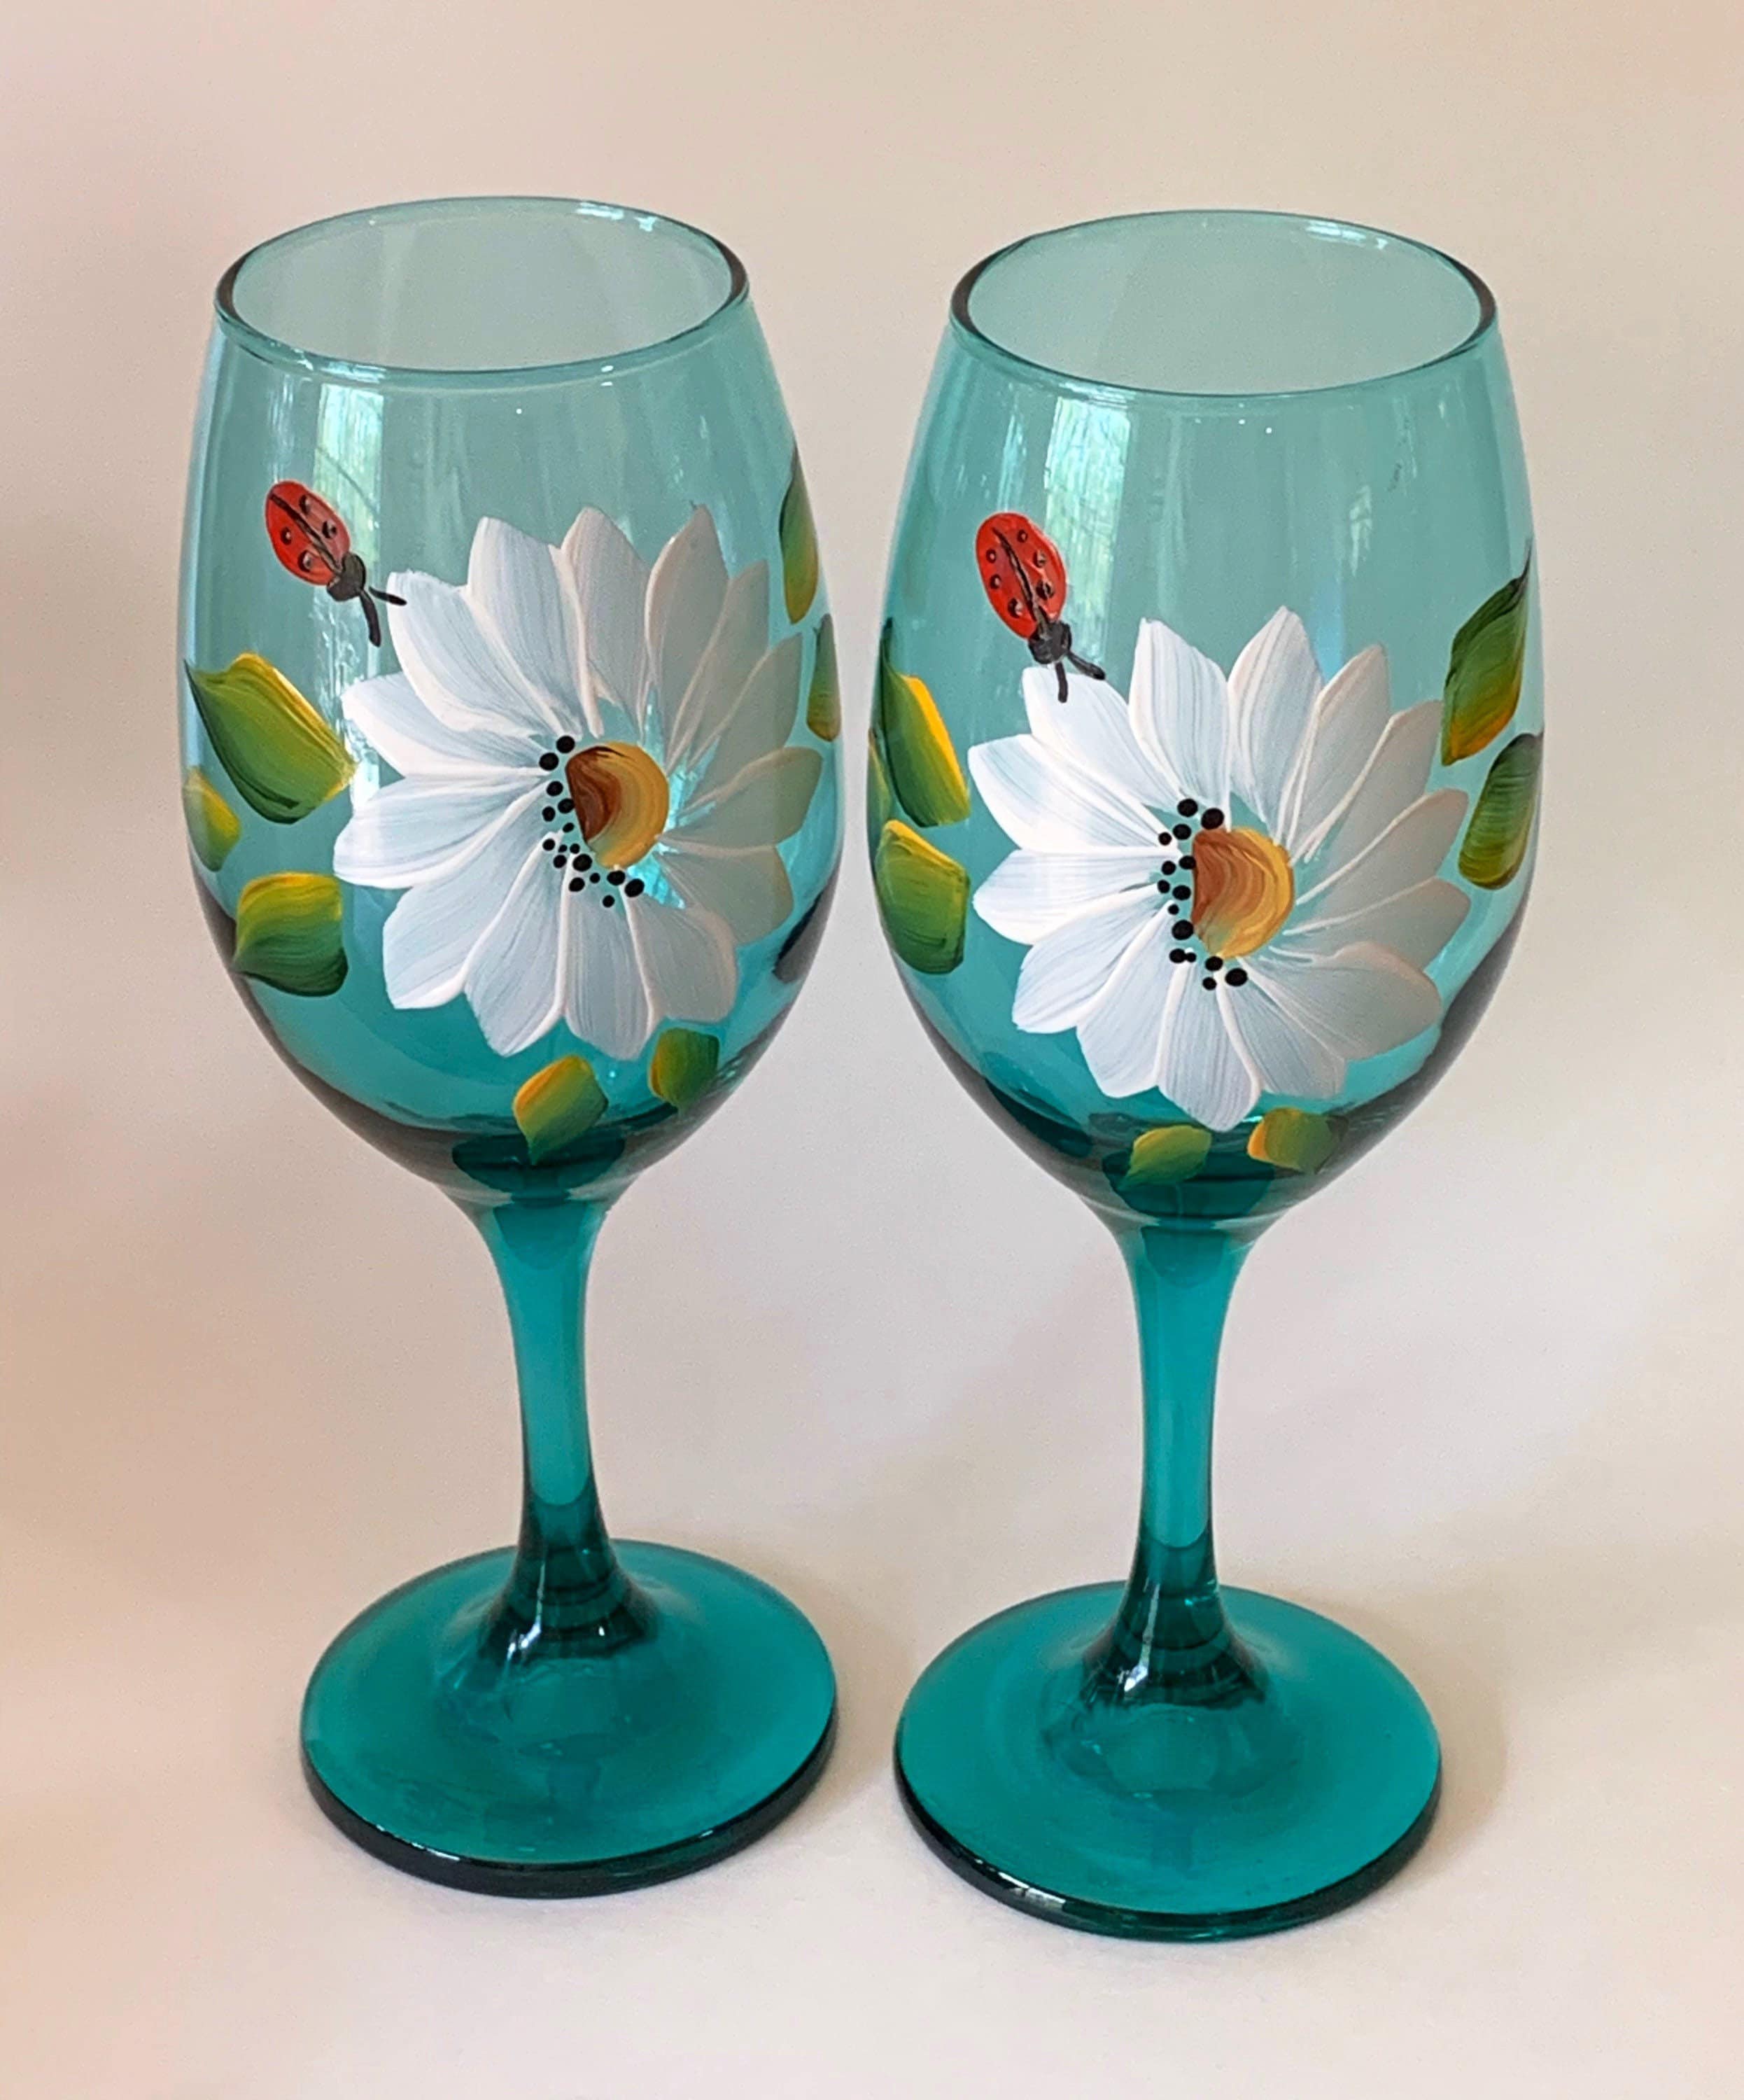 900+ Best Wine Glasses/ Glass Painting ideas  glass painting, painting  glassware, painted wine glasses